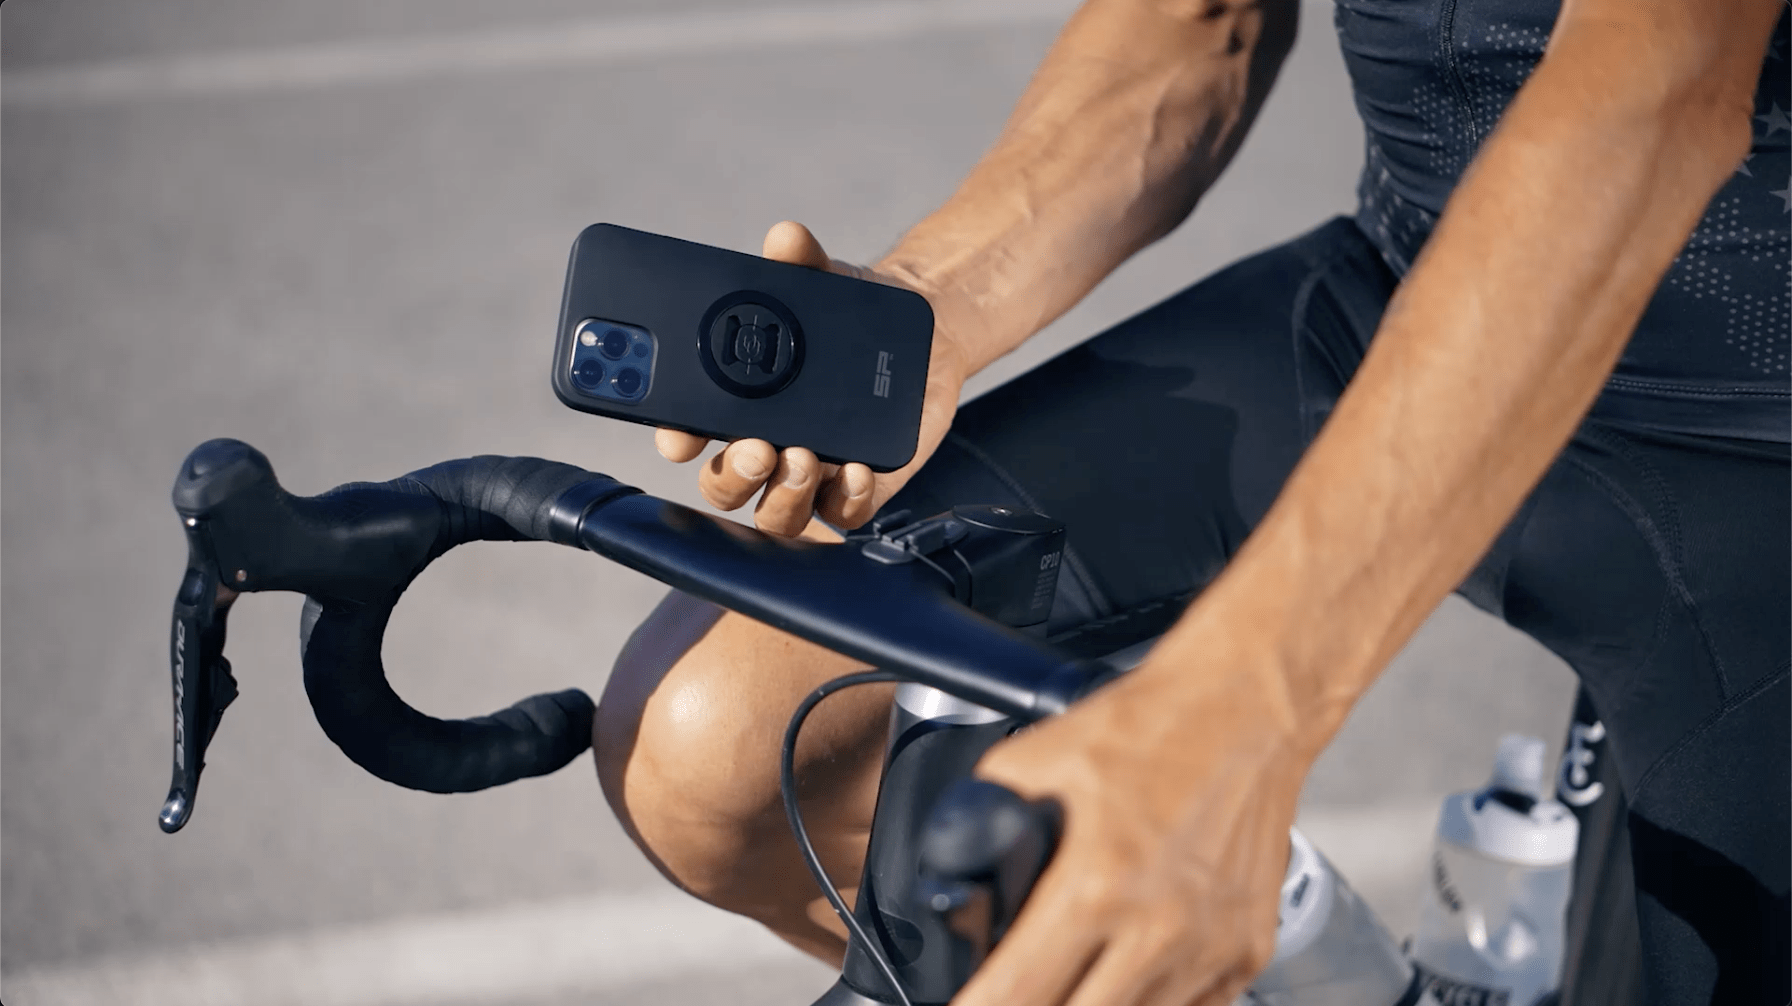 SP Connect  Quick and Secure Smartphone Mounting